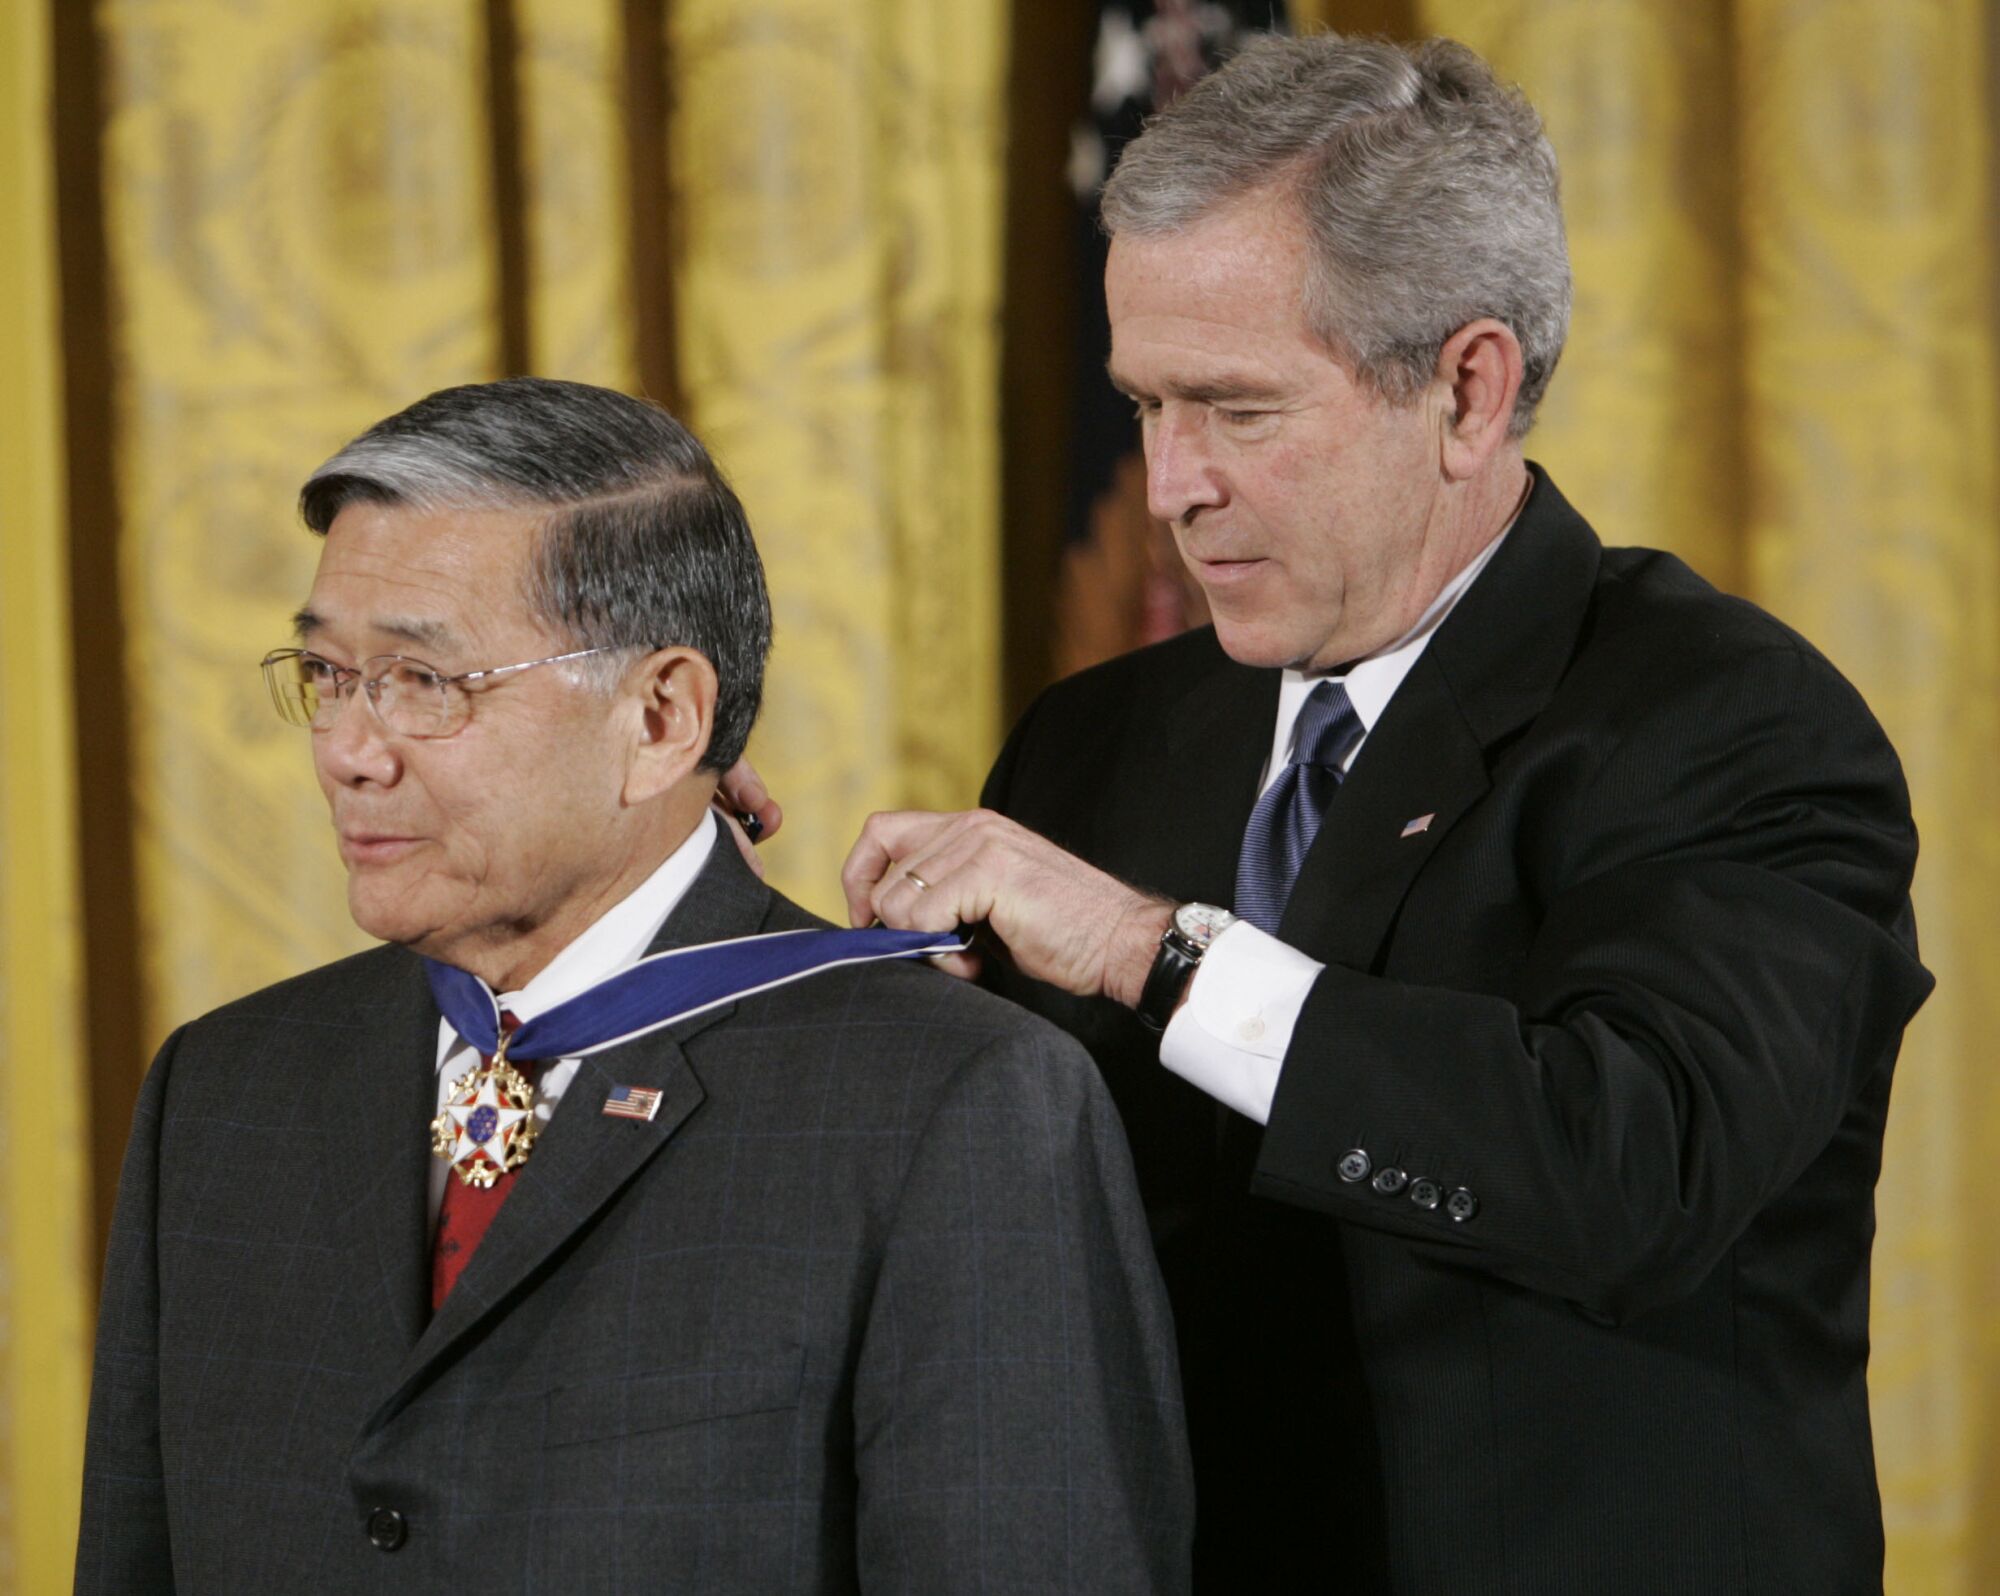 Then-President George W. Bush, right, awards the Presidential Medal of Freedom to Norman Mineta.